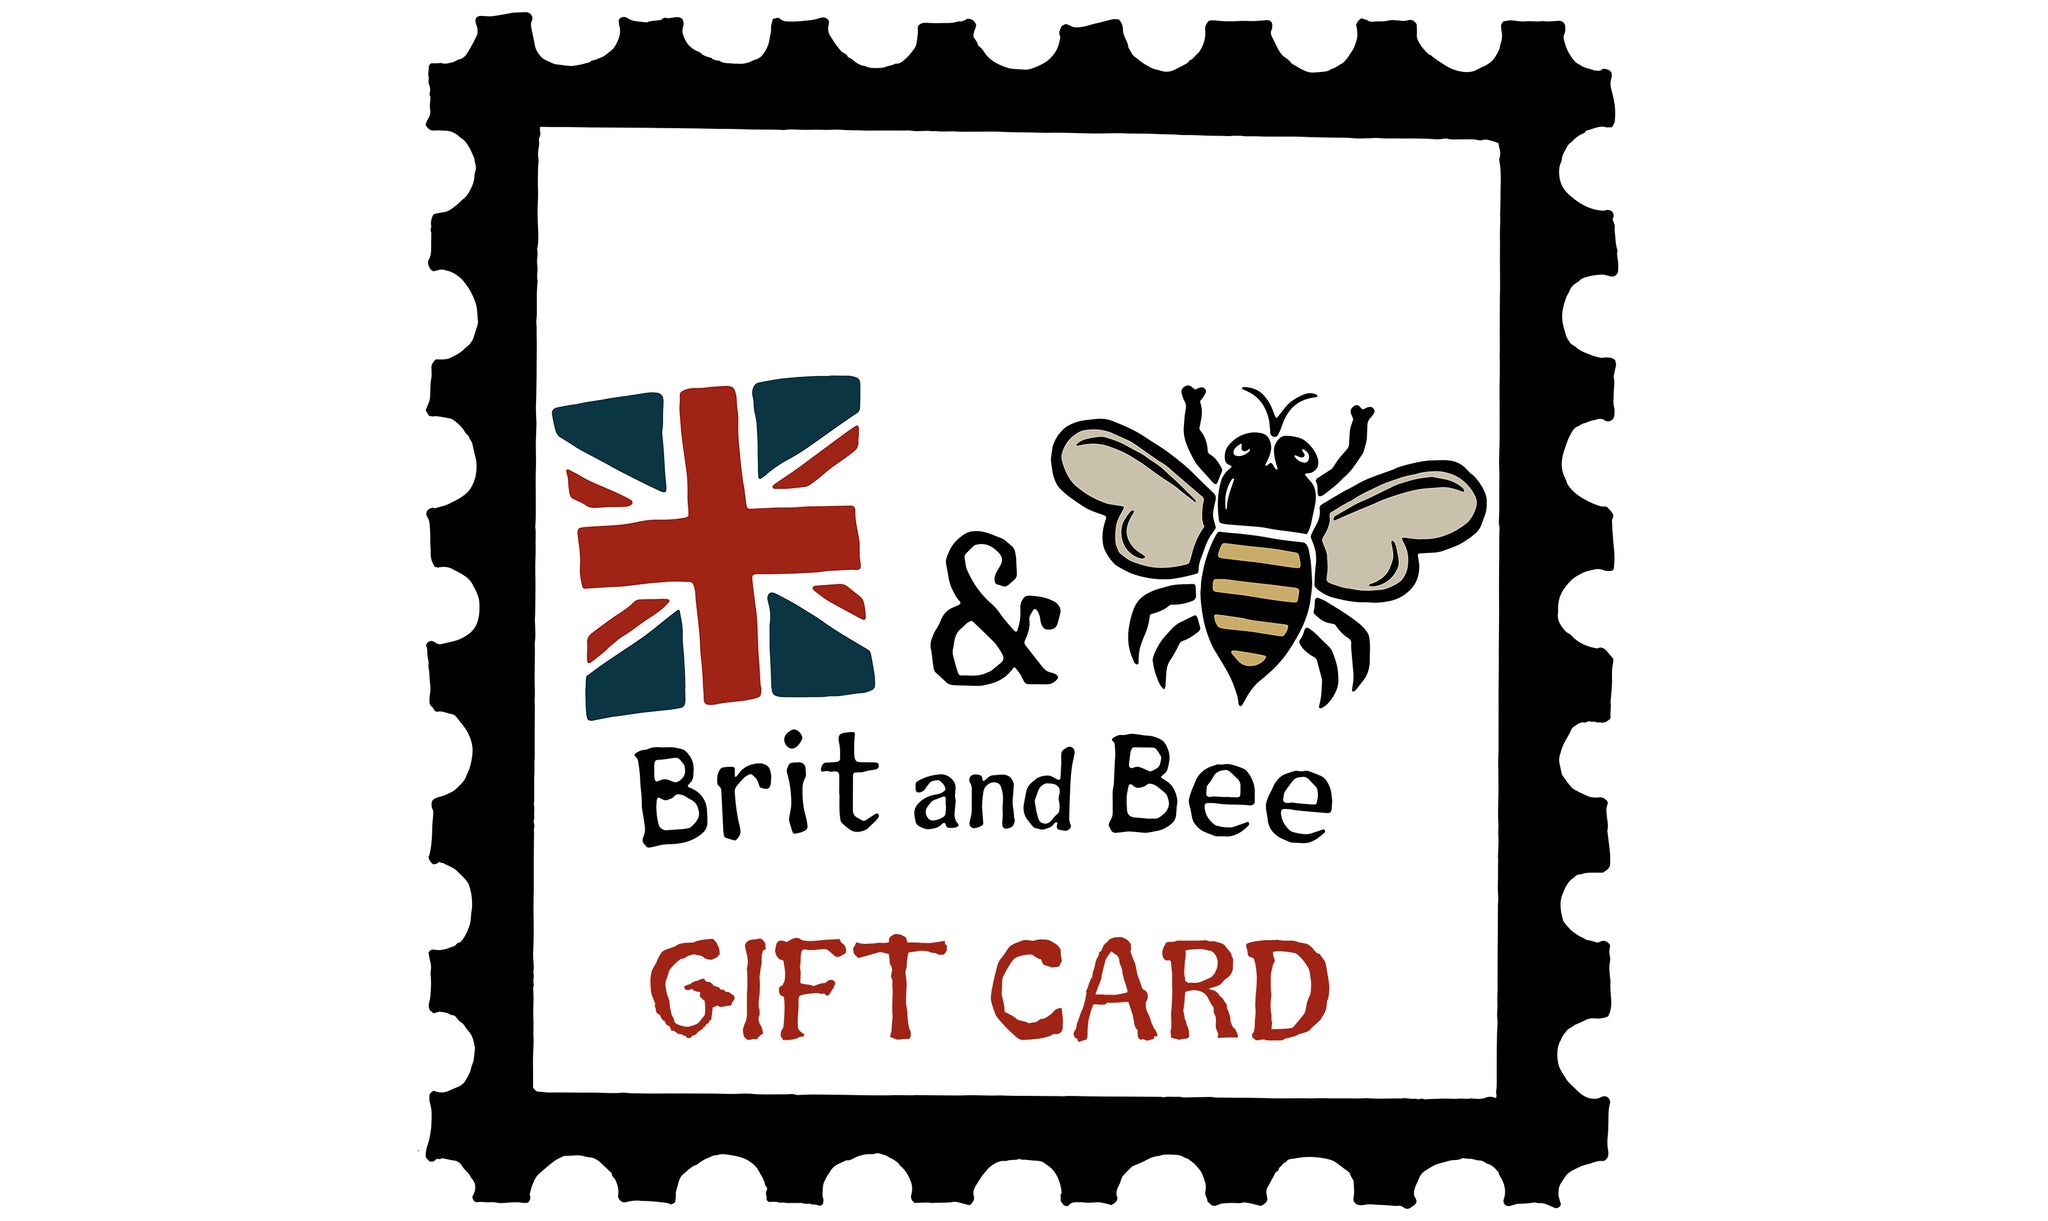 Brit and Bee Gift Card